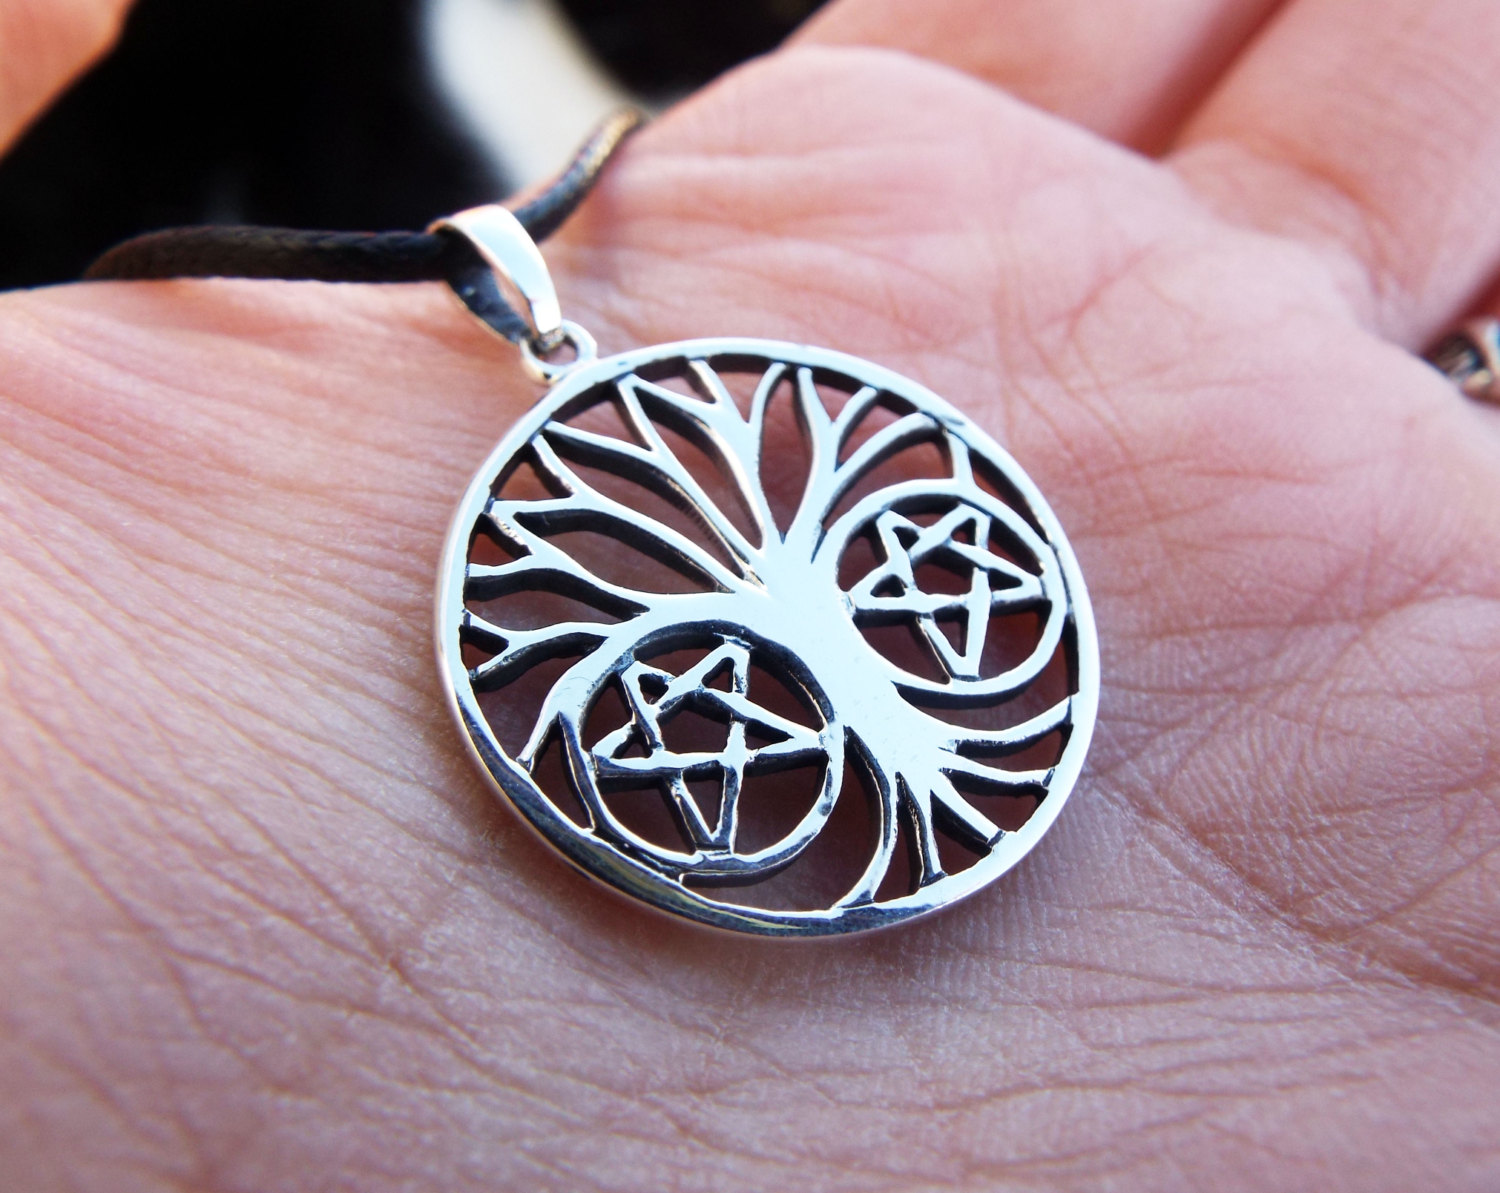 Handcrafted 925 Sterling Silver Carved Out Celtic Tree of Life Pendant 